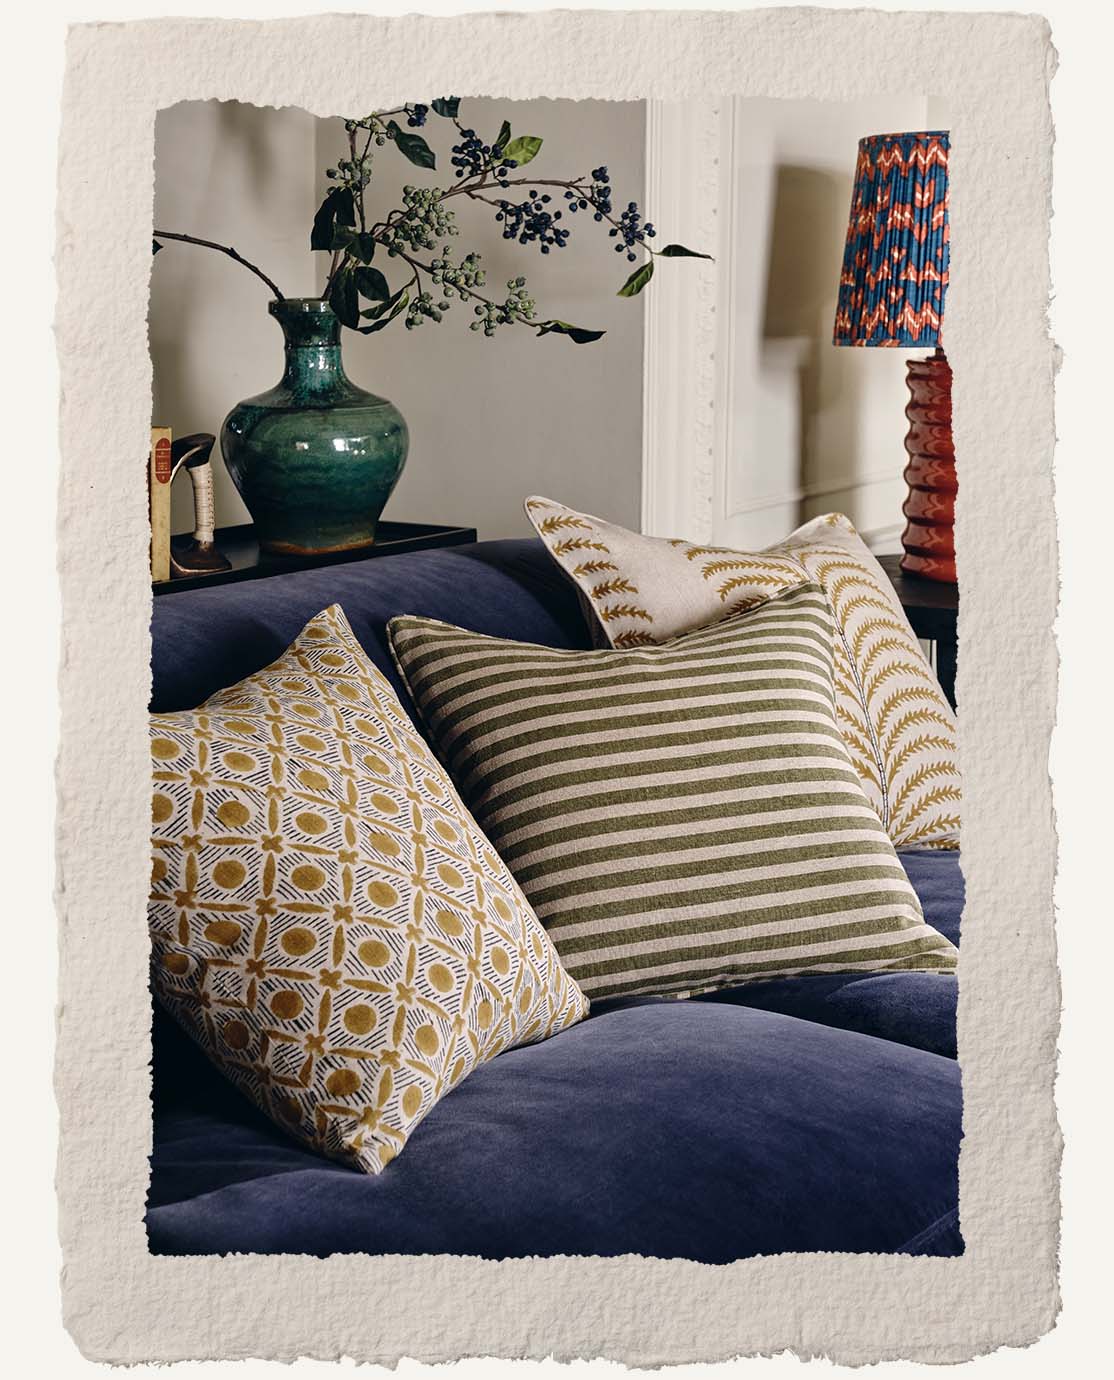 A close up of a blue velvet sofa decorated with patterned cushions in green and mustard yellow. In the background is a blue vase holding flowers.